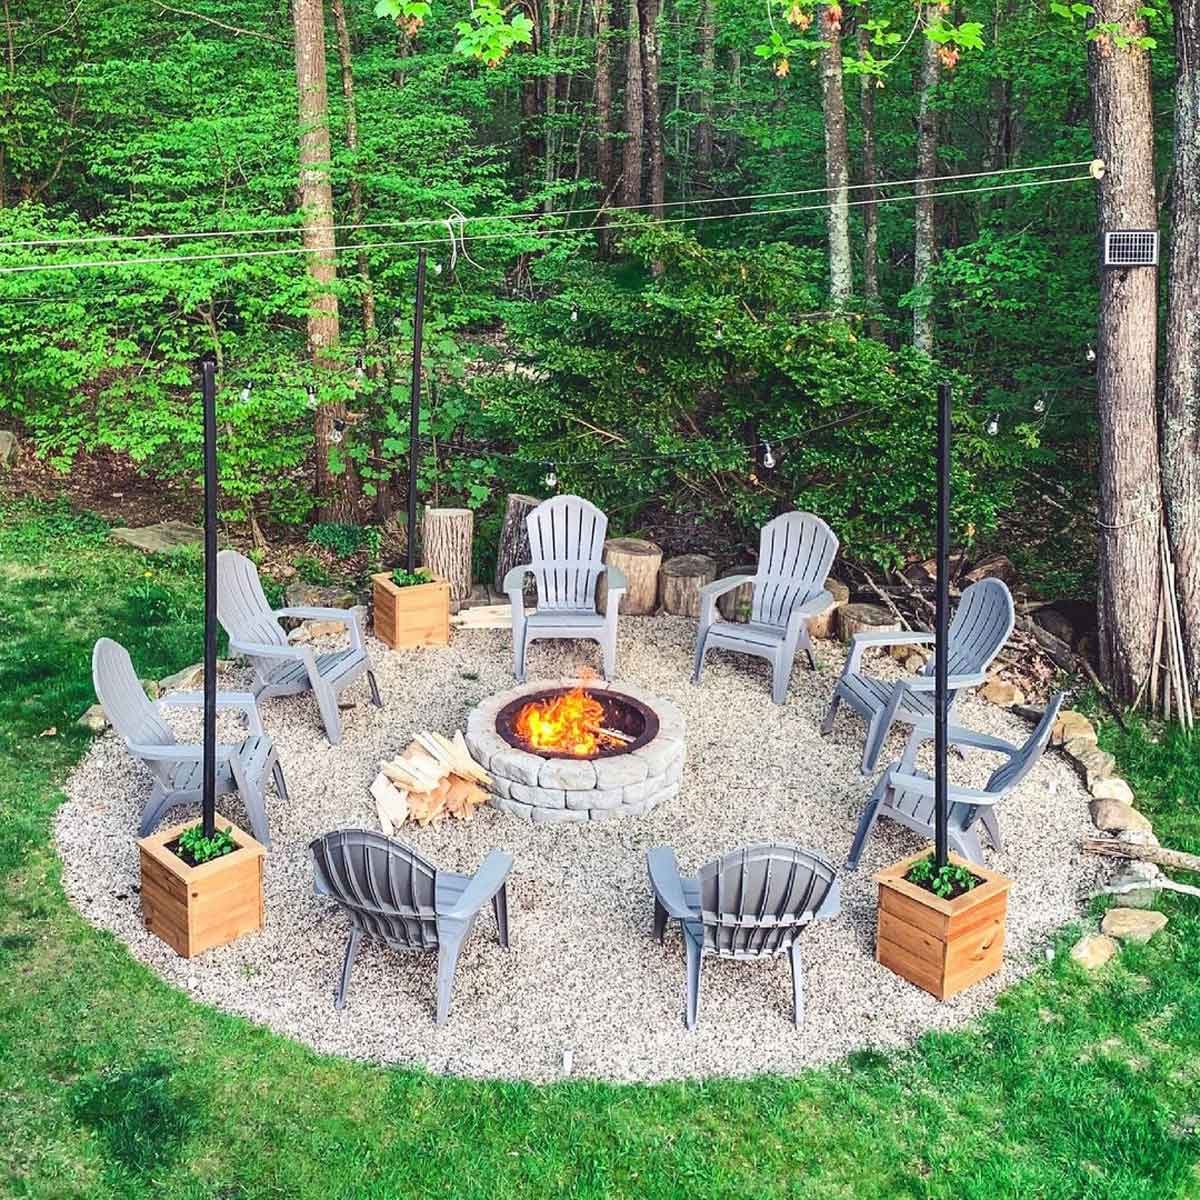 Fire Pit Seating 206241147 493399921914762 8098330328915506237 N 